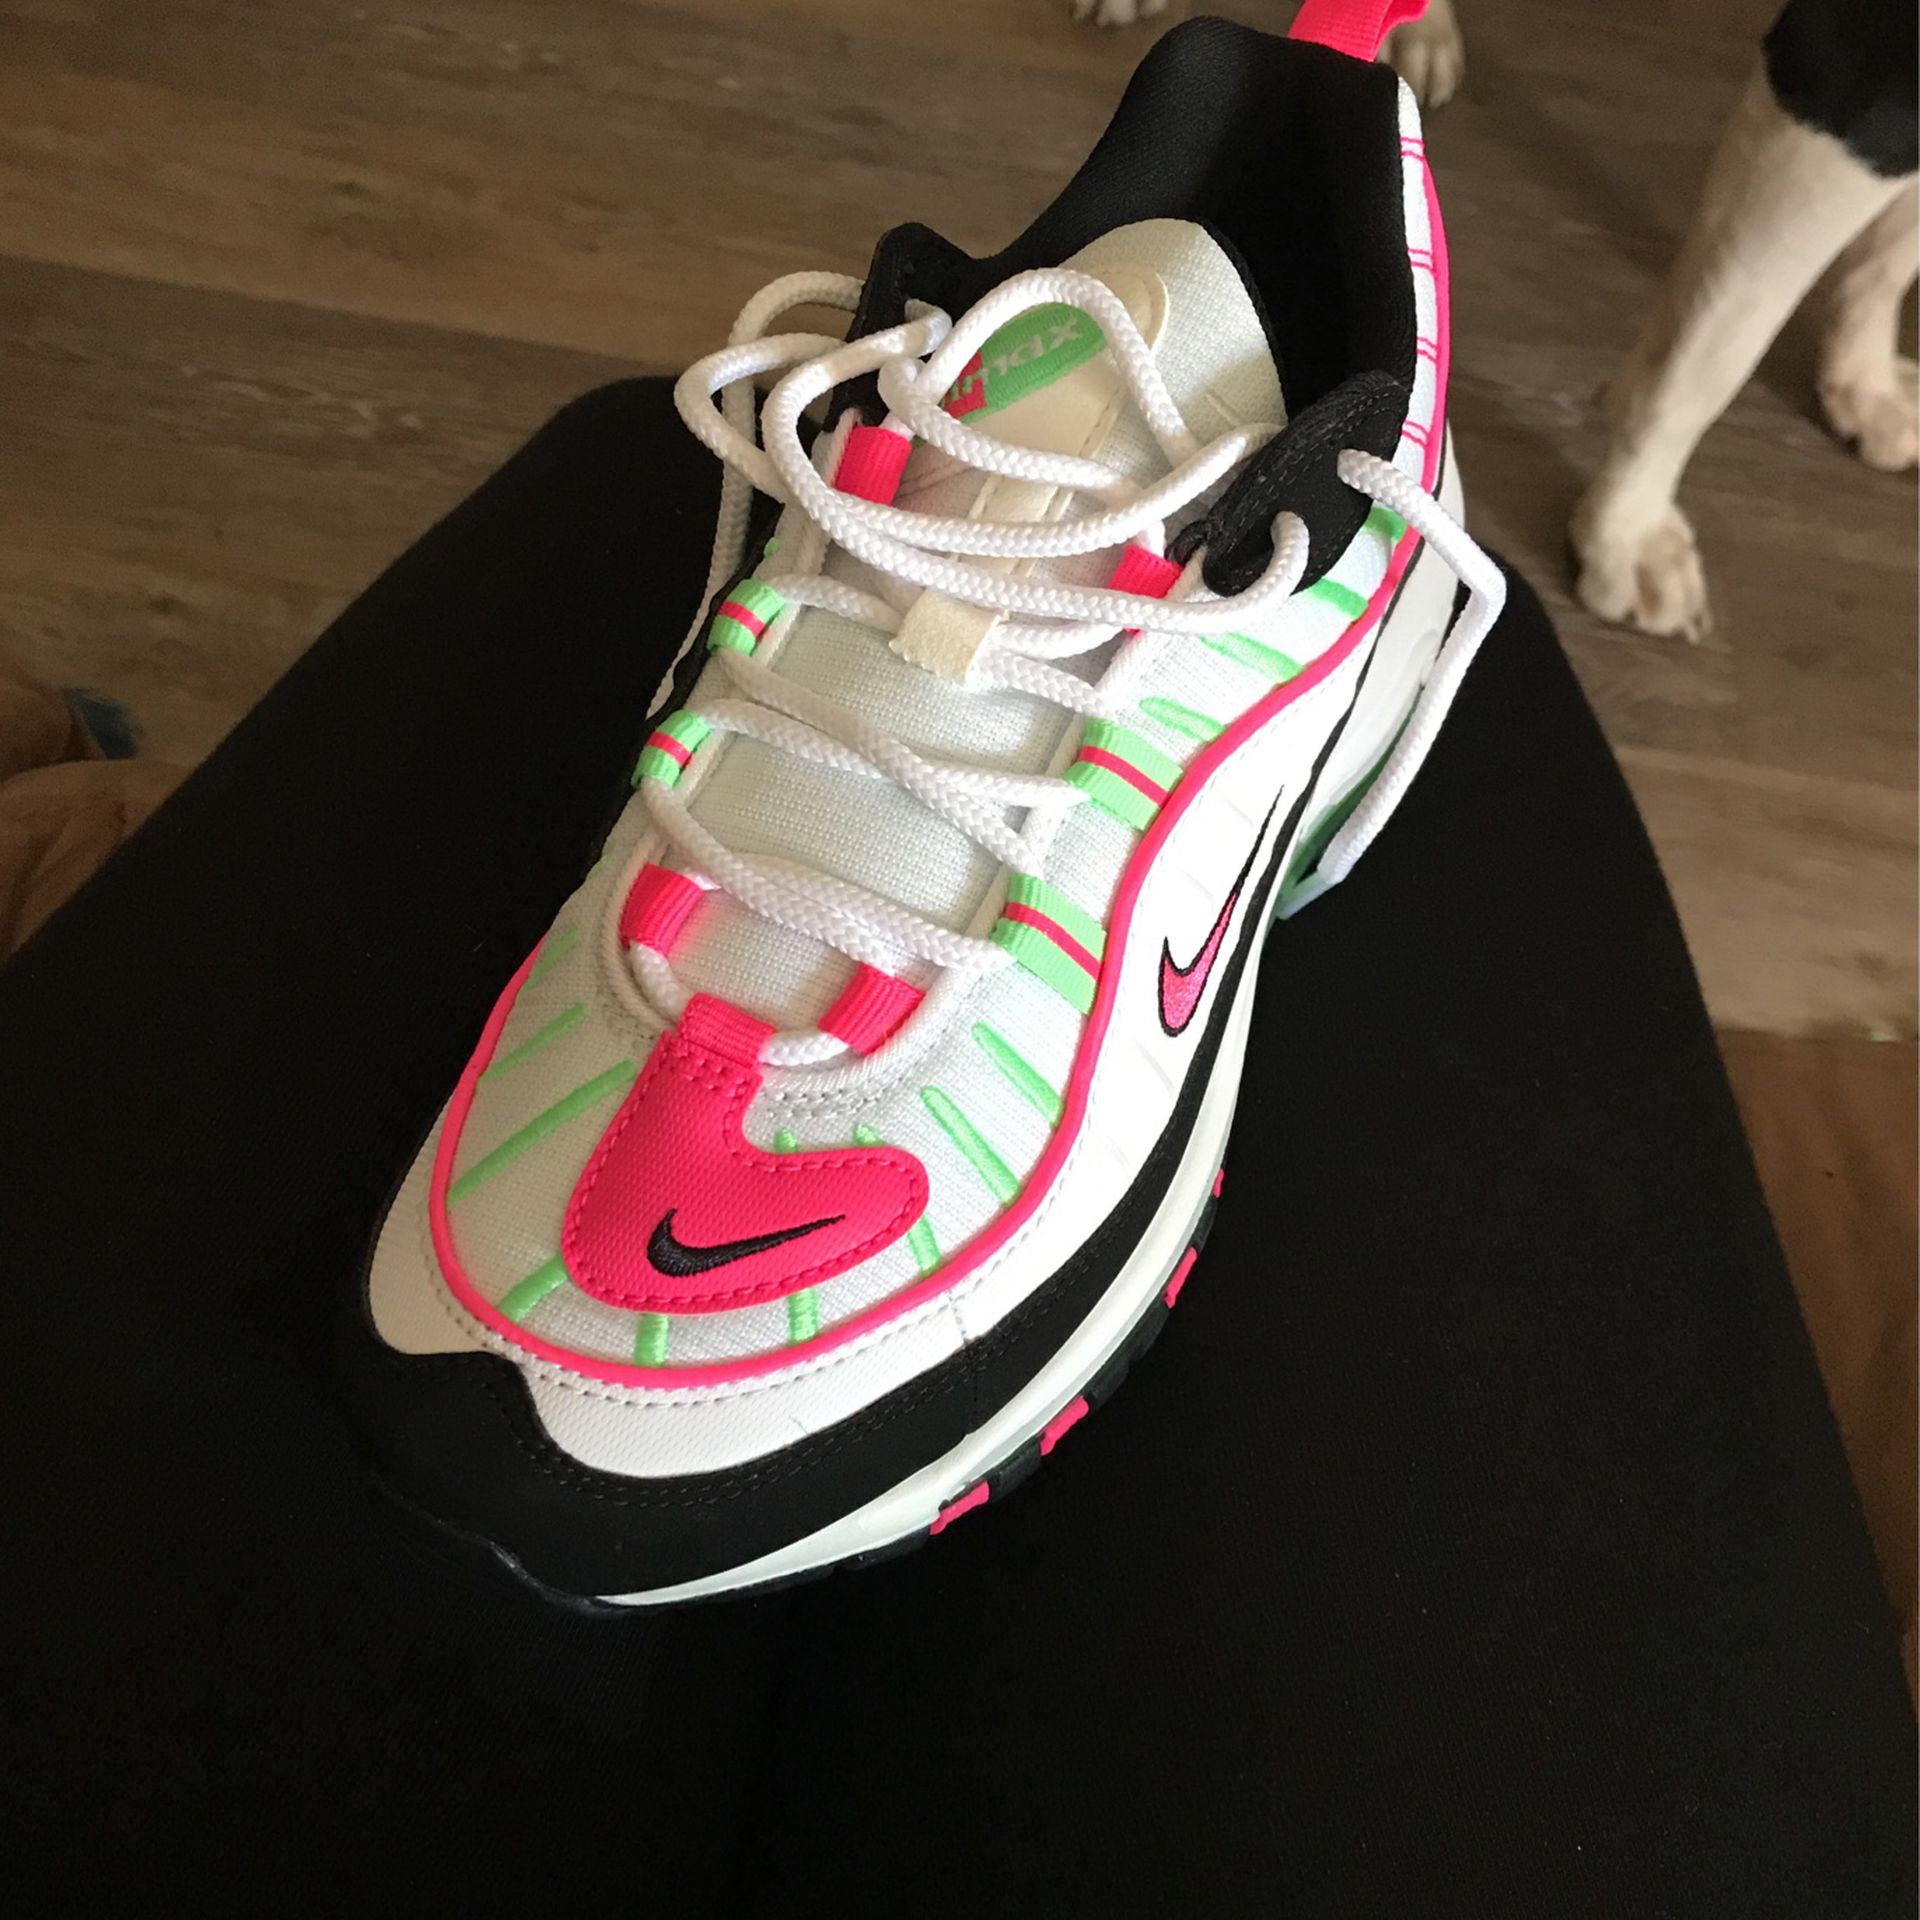 Nike Air Max 98 Watermelon for Sale in - OfferUp